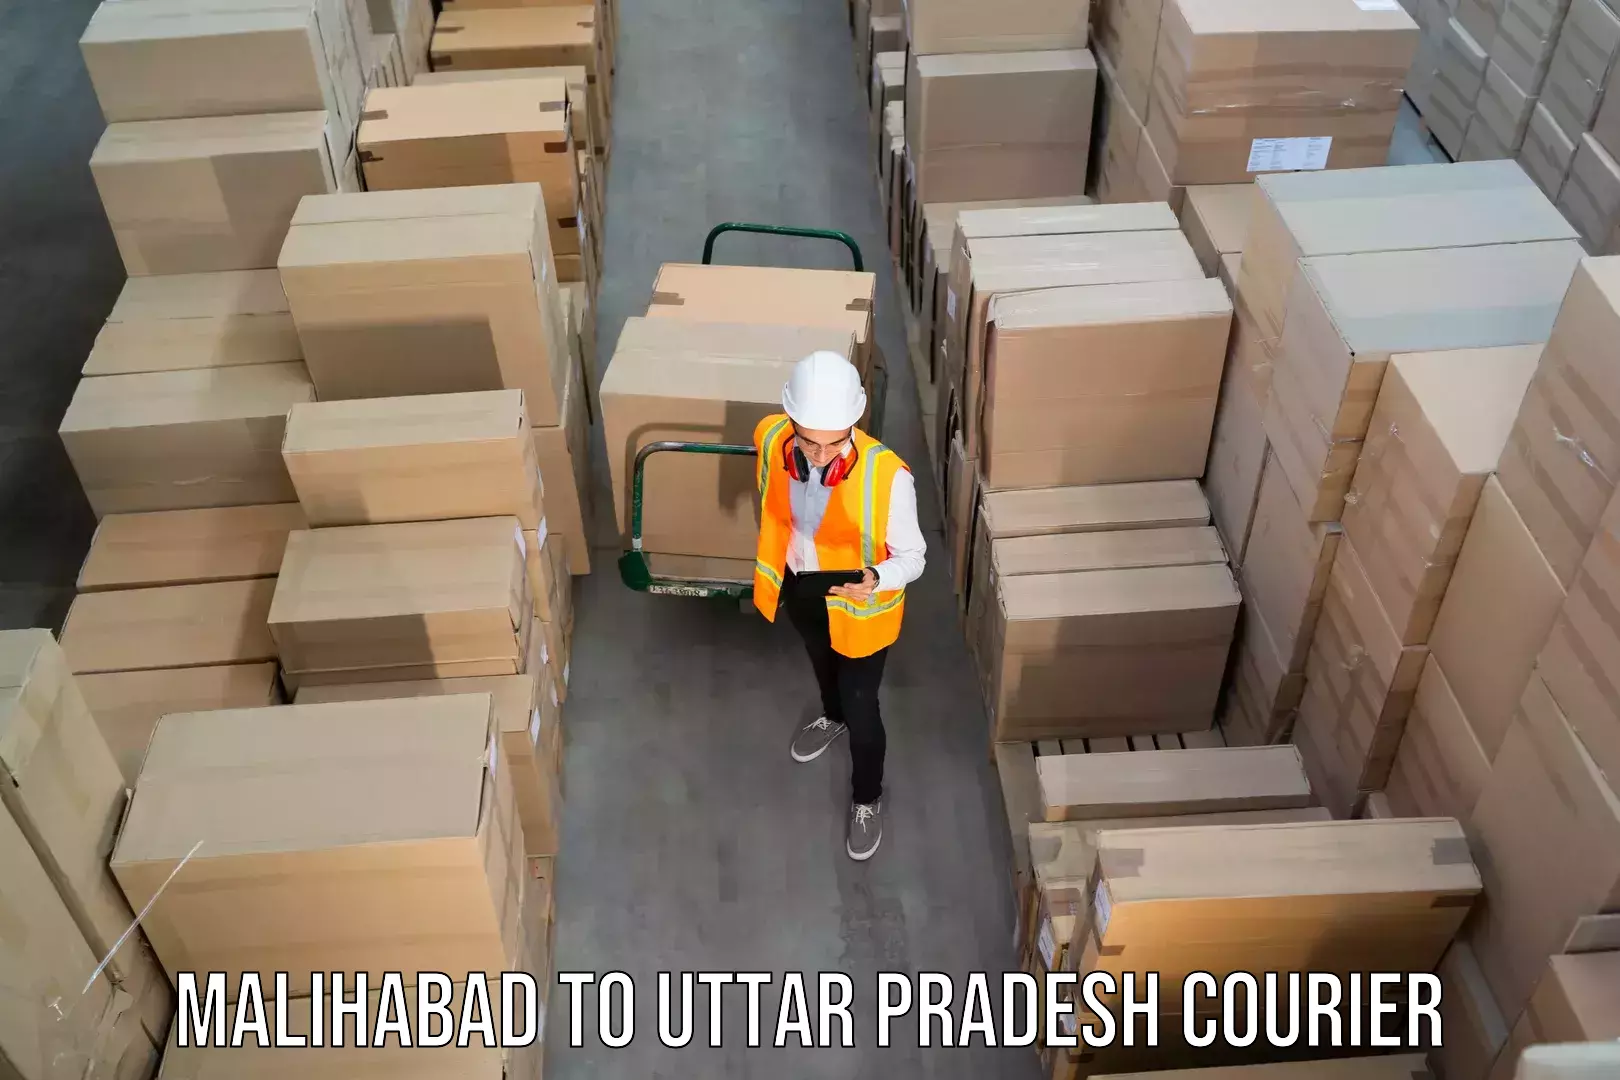 Express delivery capabilities in Malihabad to Agra